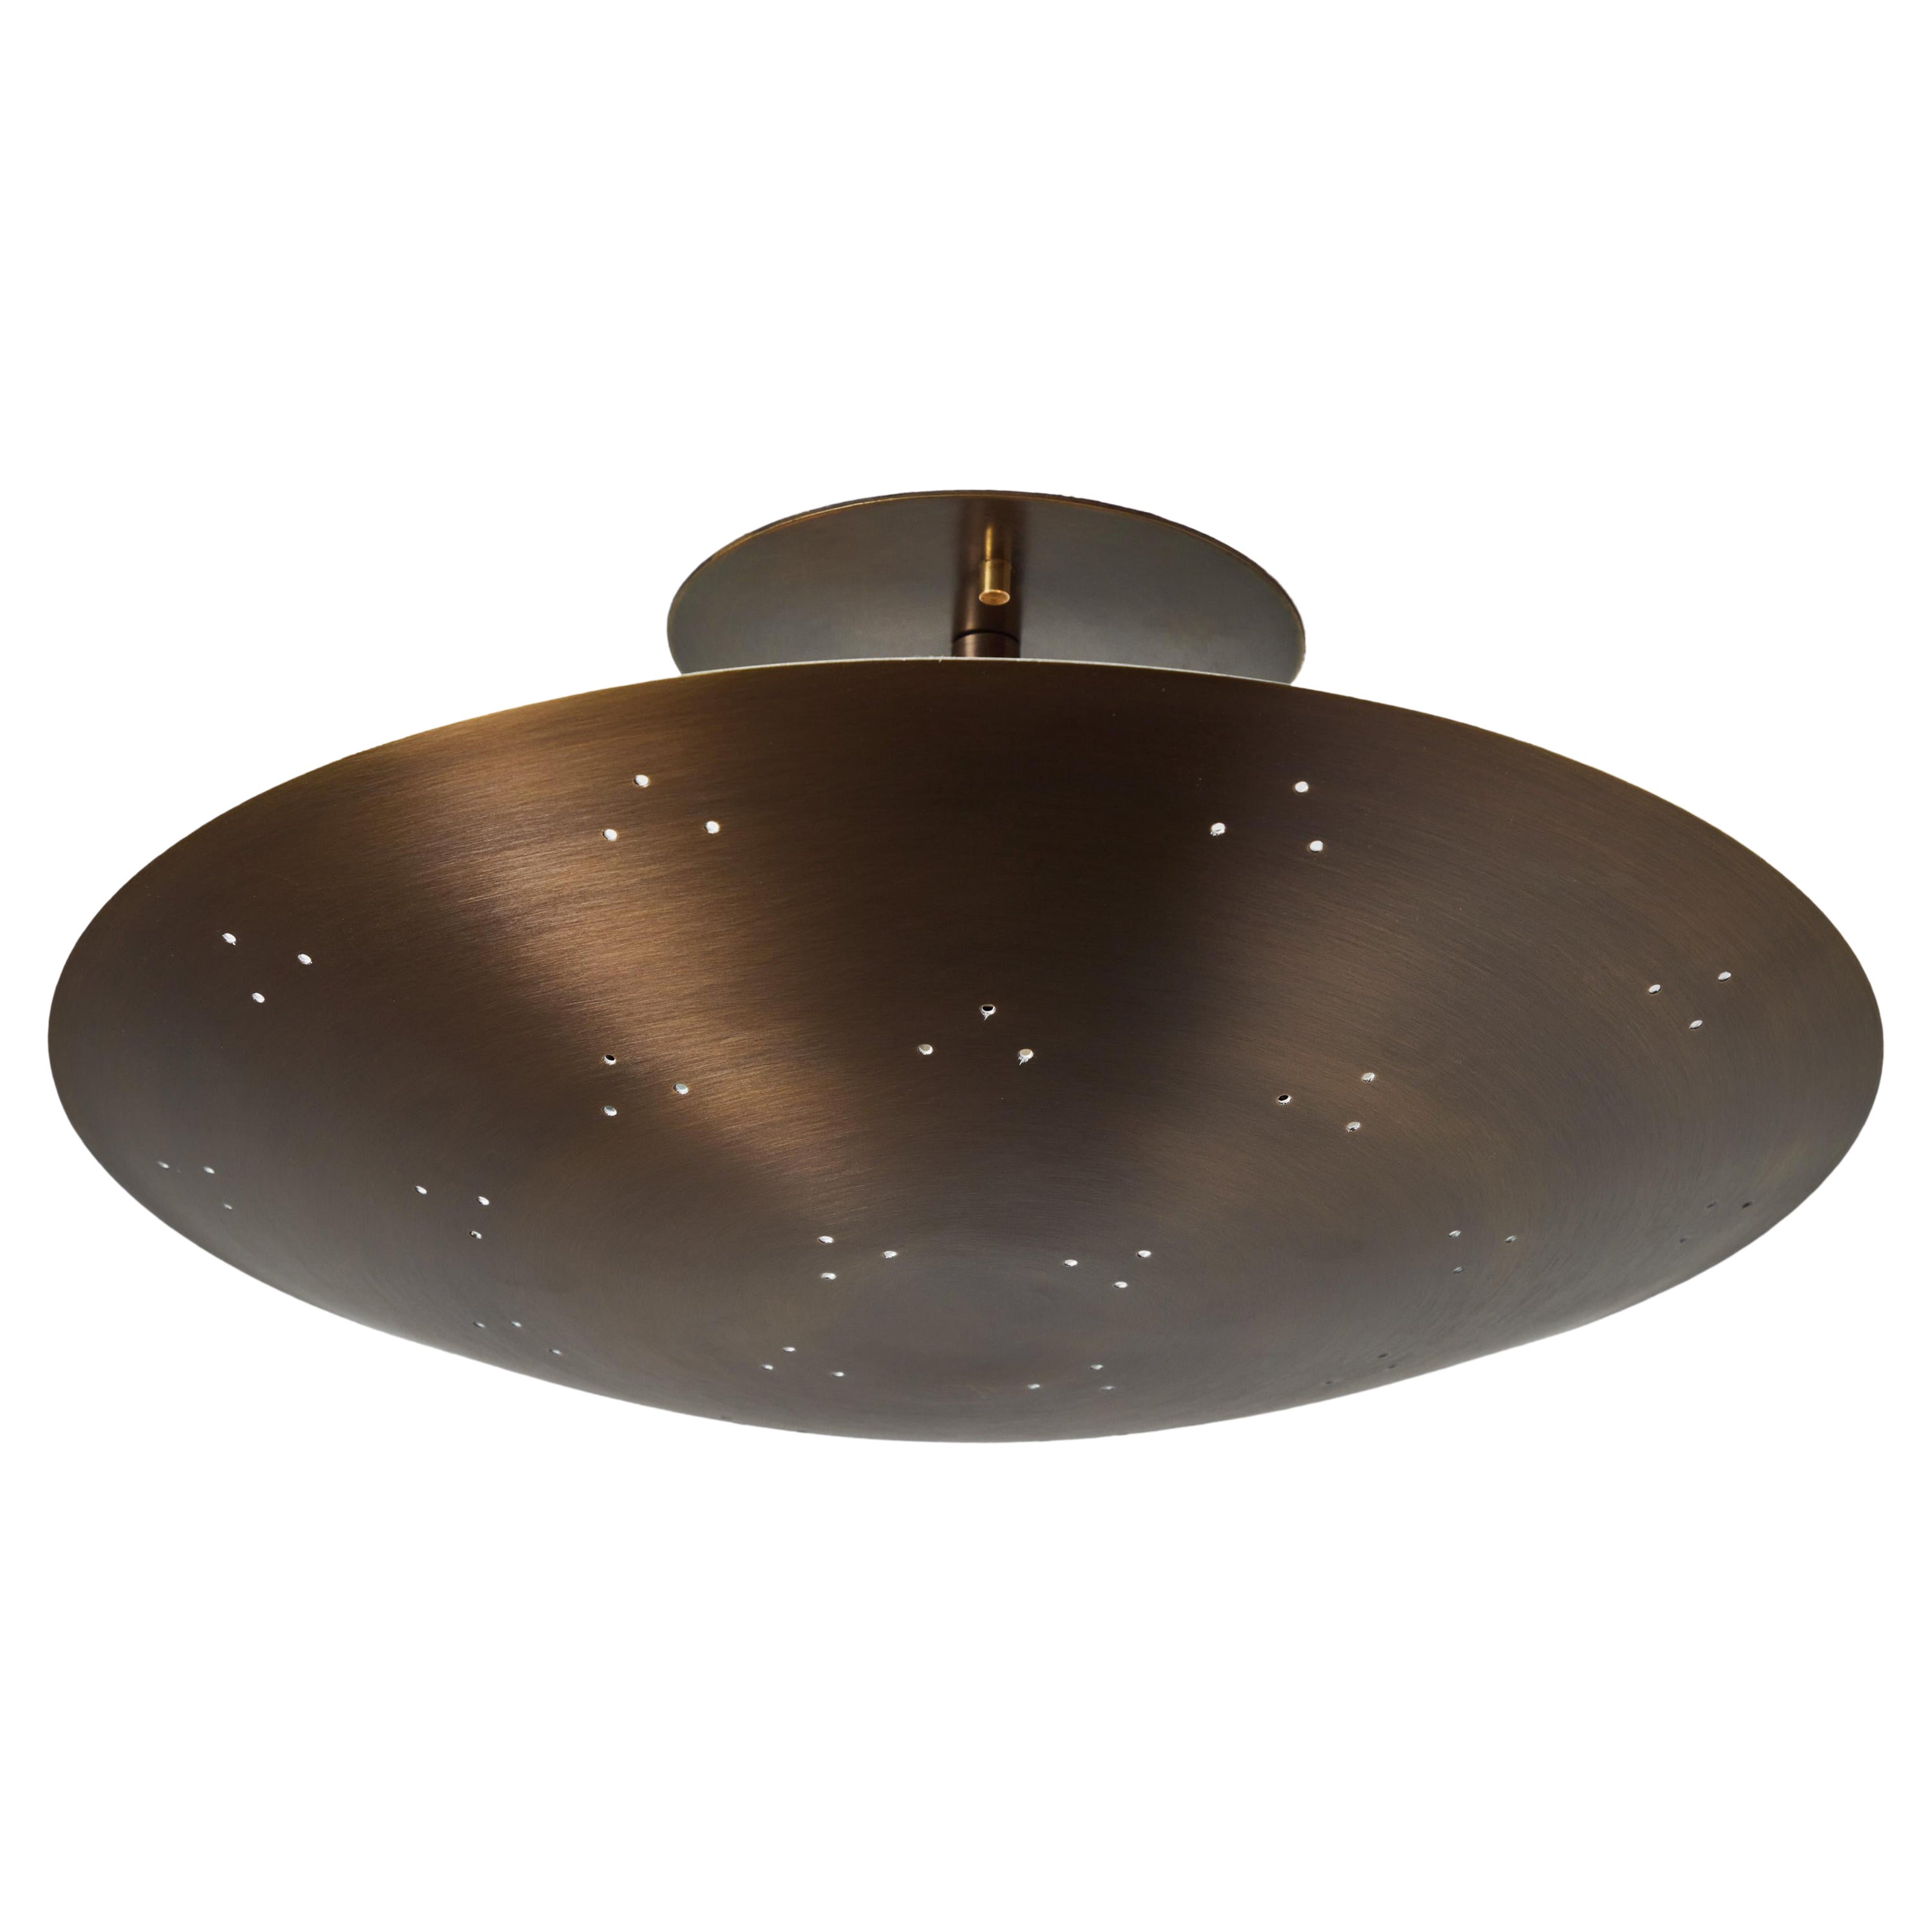 Two Enlighten 'Rey' Perforated Patinated Brass Dome Ceiling Lamp For Sale